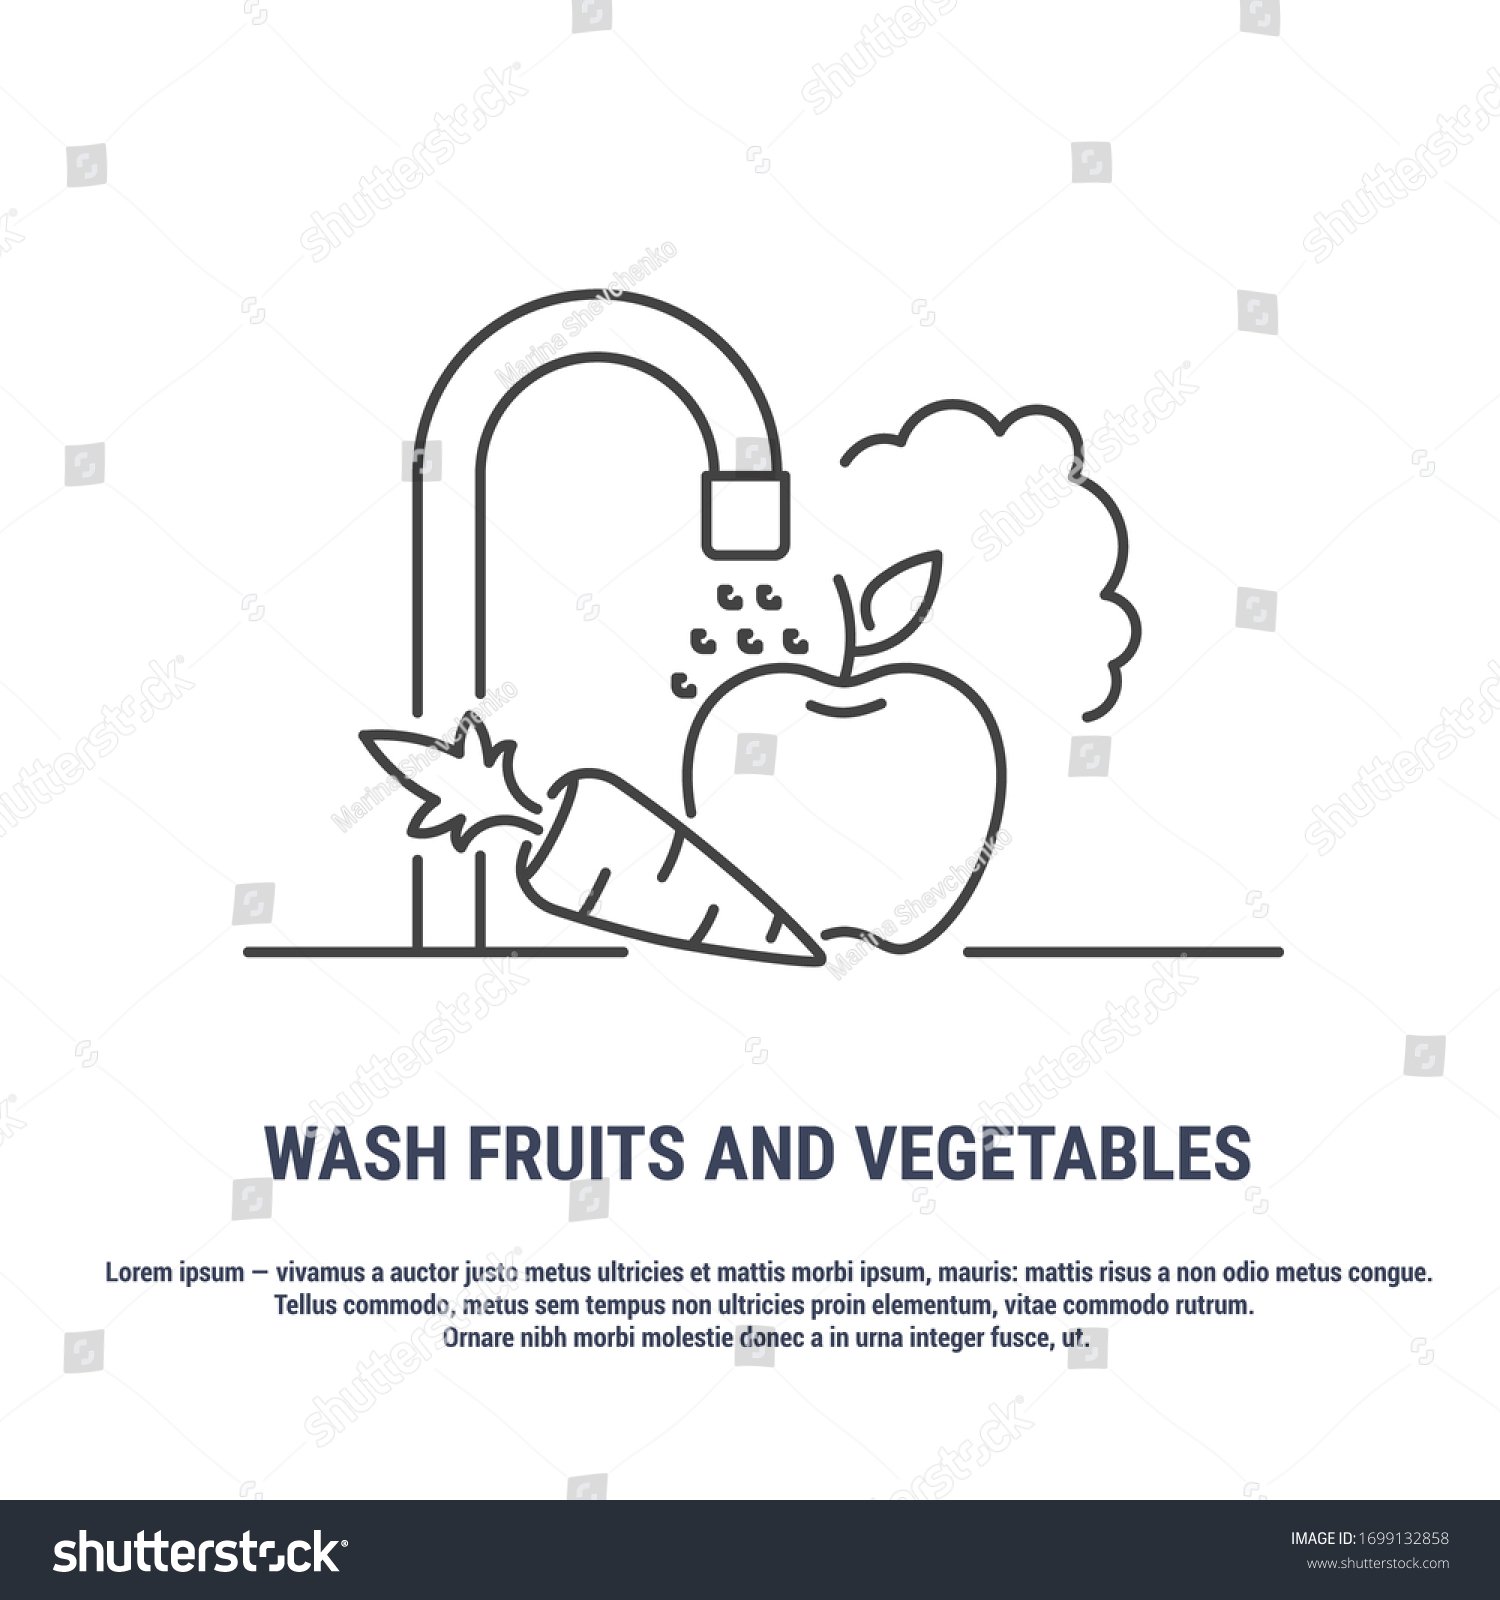 Vector graphic. Line, outline design icon on a white background. Food hygiene. Need to wash vegetables and fruits. Precautions. Disinfection of fruits and vegetables. Editable Stroke. Symbol, sign. #1699132858